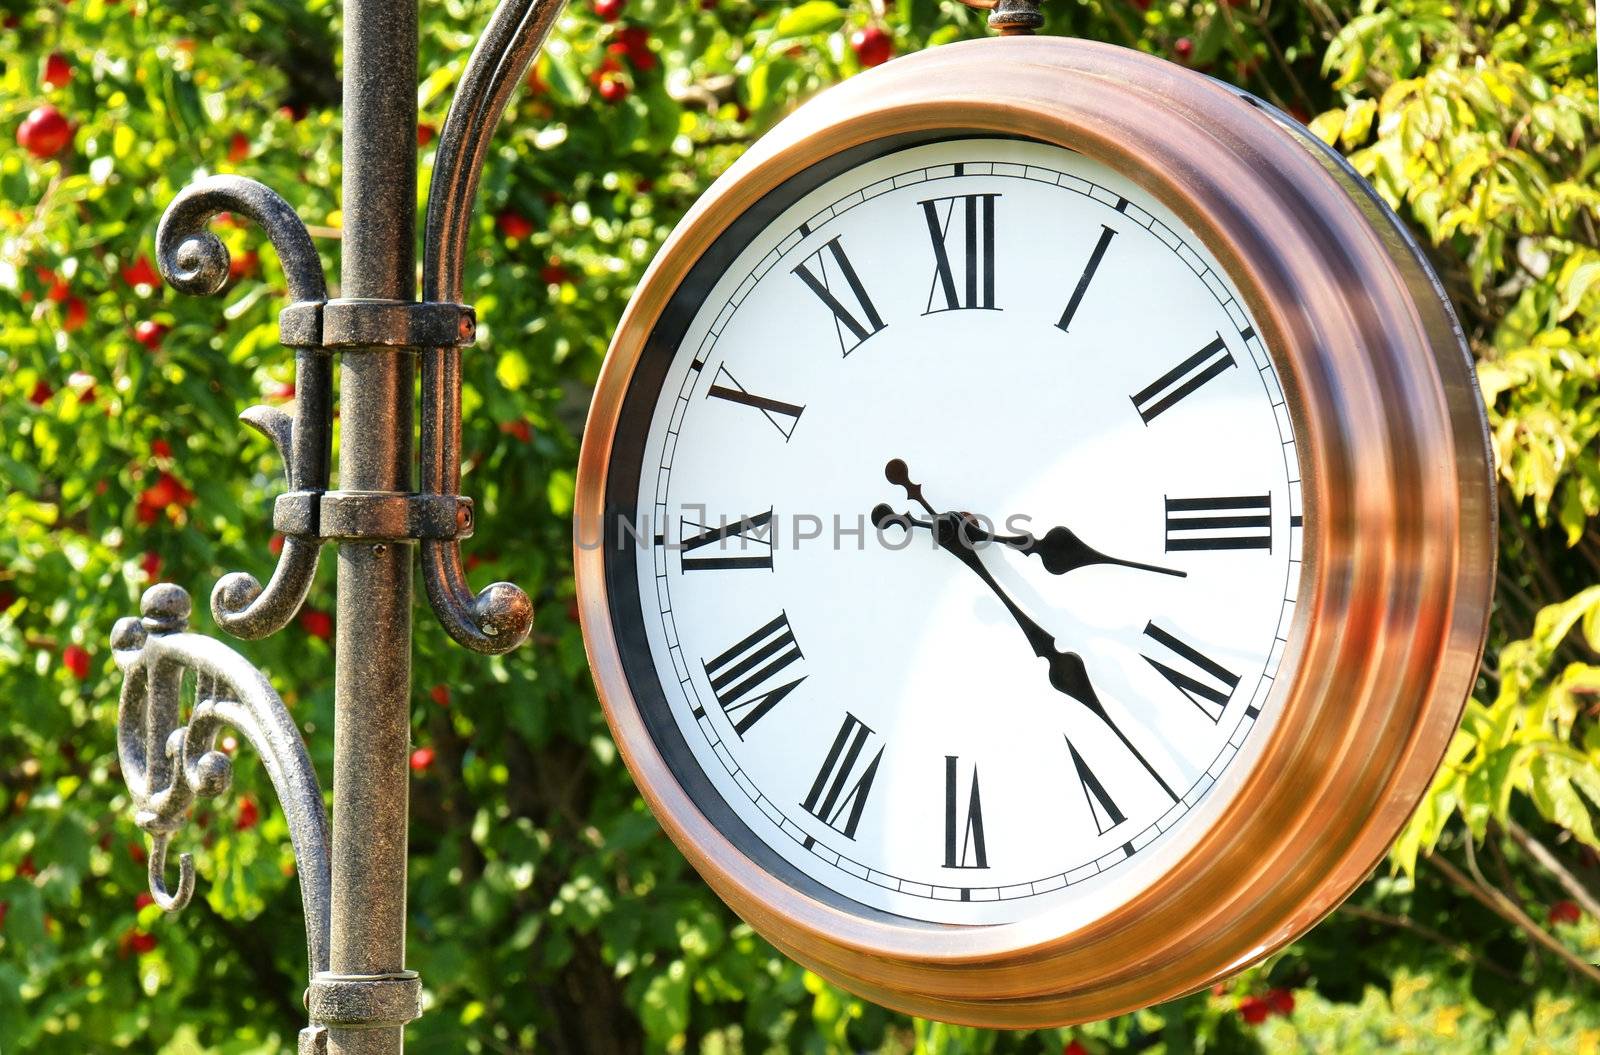 Great copper outdoor clock reminding us it is time to pick up those gorgeous ripe red apple in the tree behind.